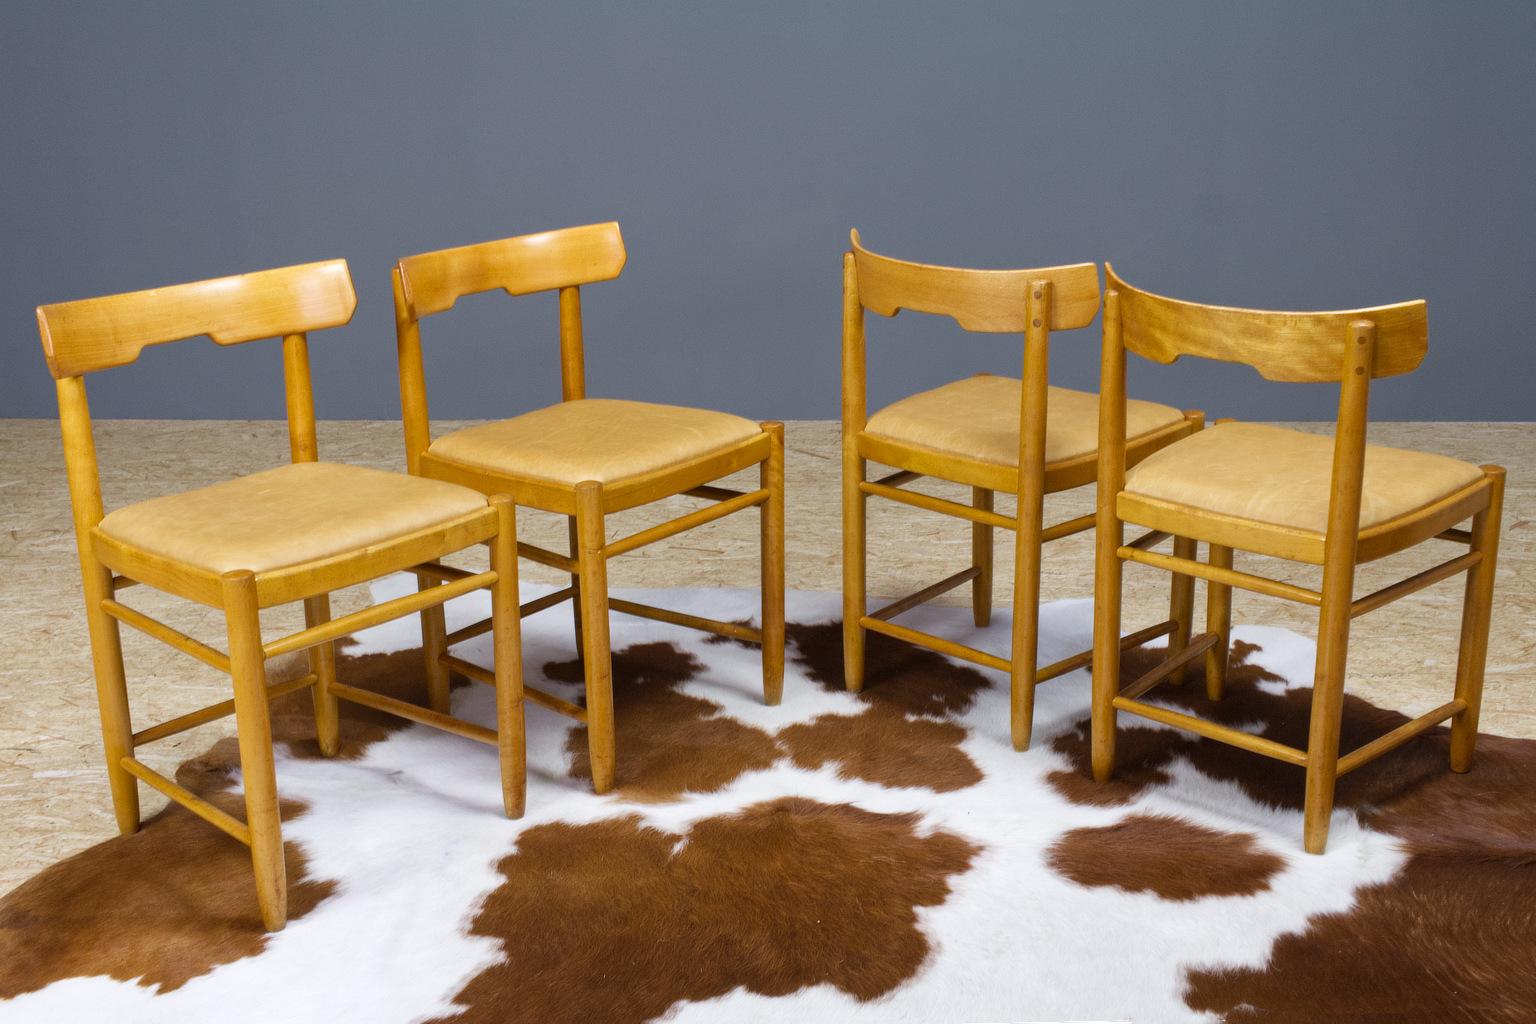 Oiled Scandinavian Modern Dining Chairs in Beech and Tan Leather, 1960s Set of 4 For Sale